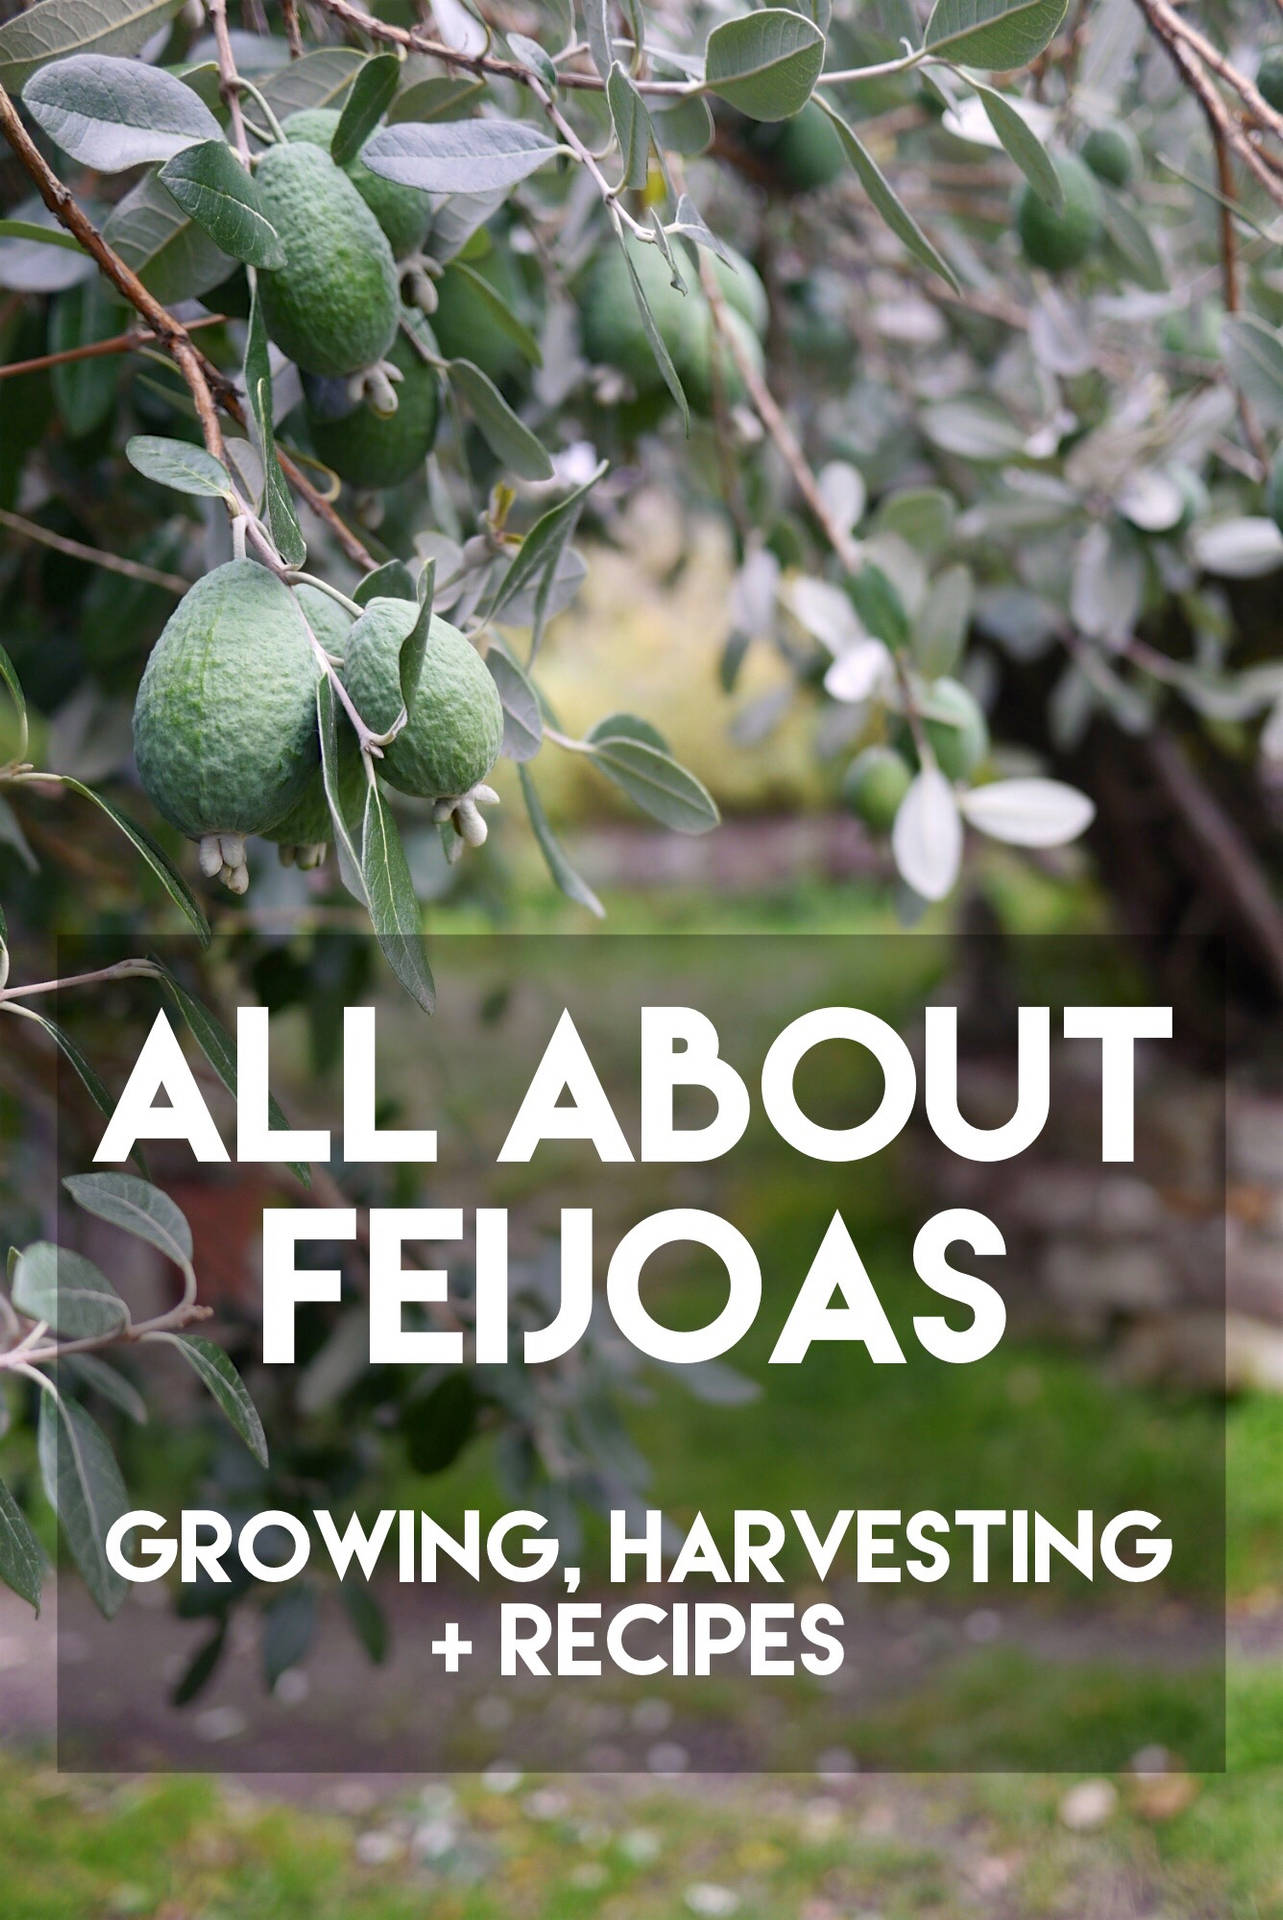 All About Feijoas Wallpaper